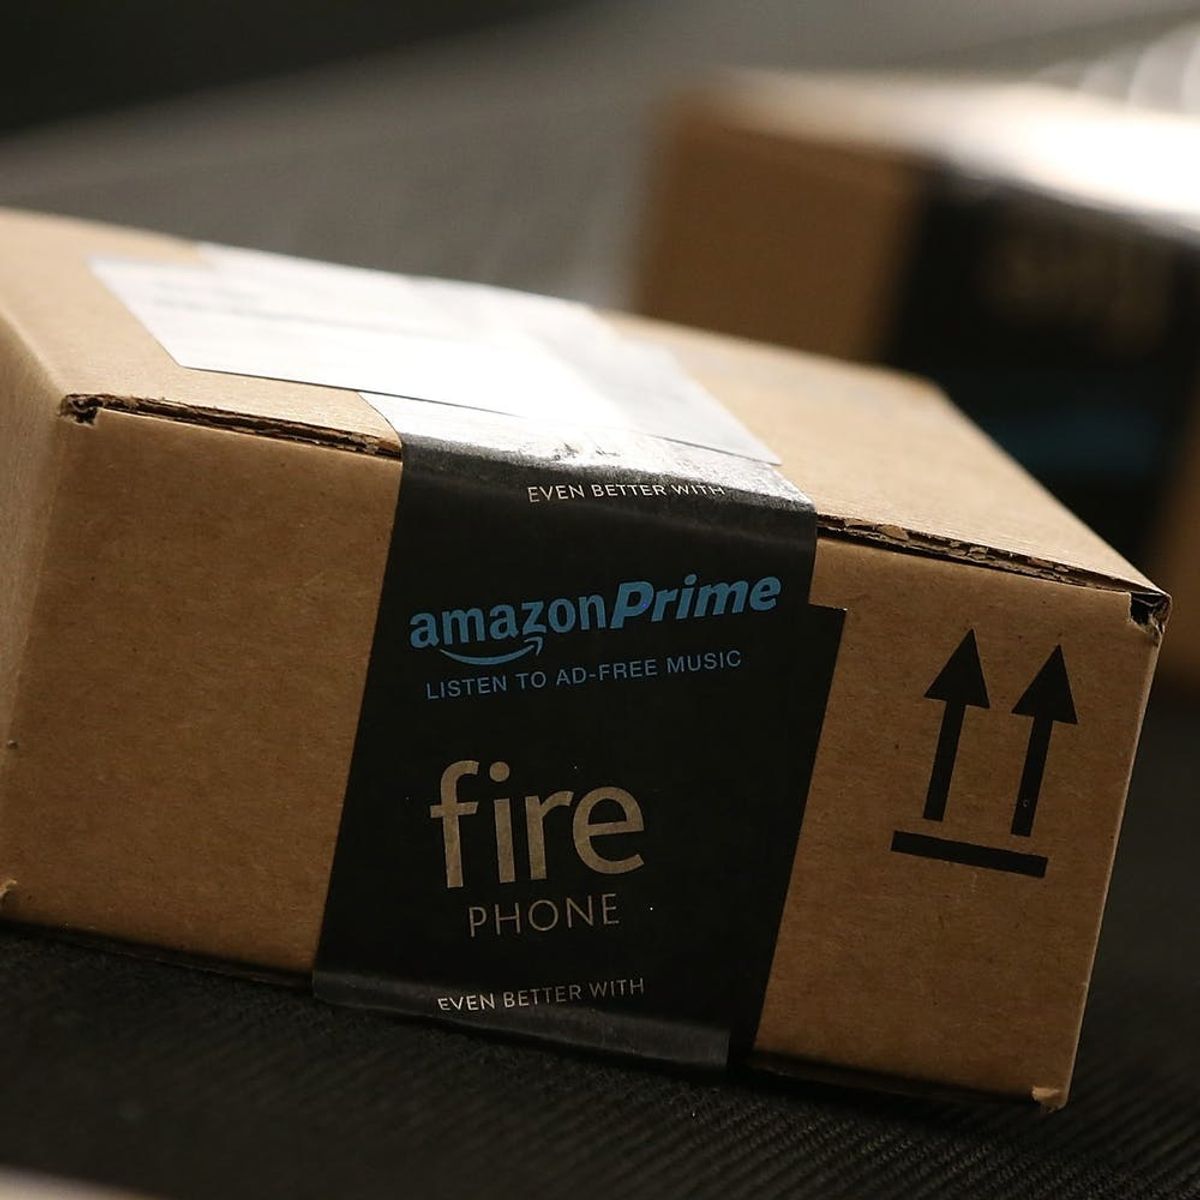 Yikes: Your Annual Prime Membership Is About to Get Even MORE Expensive